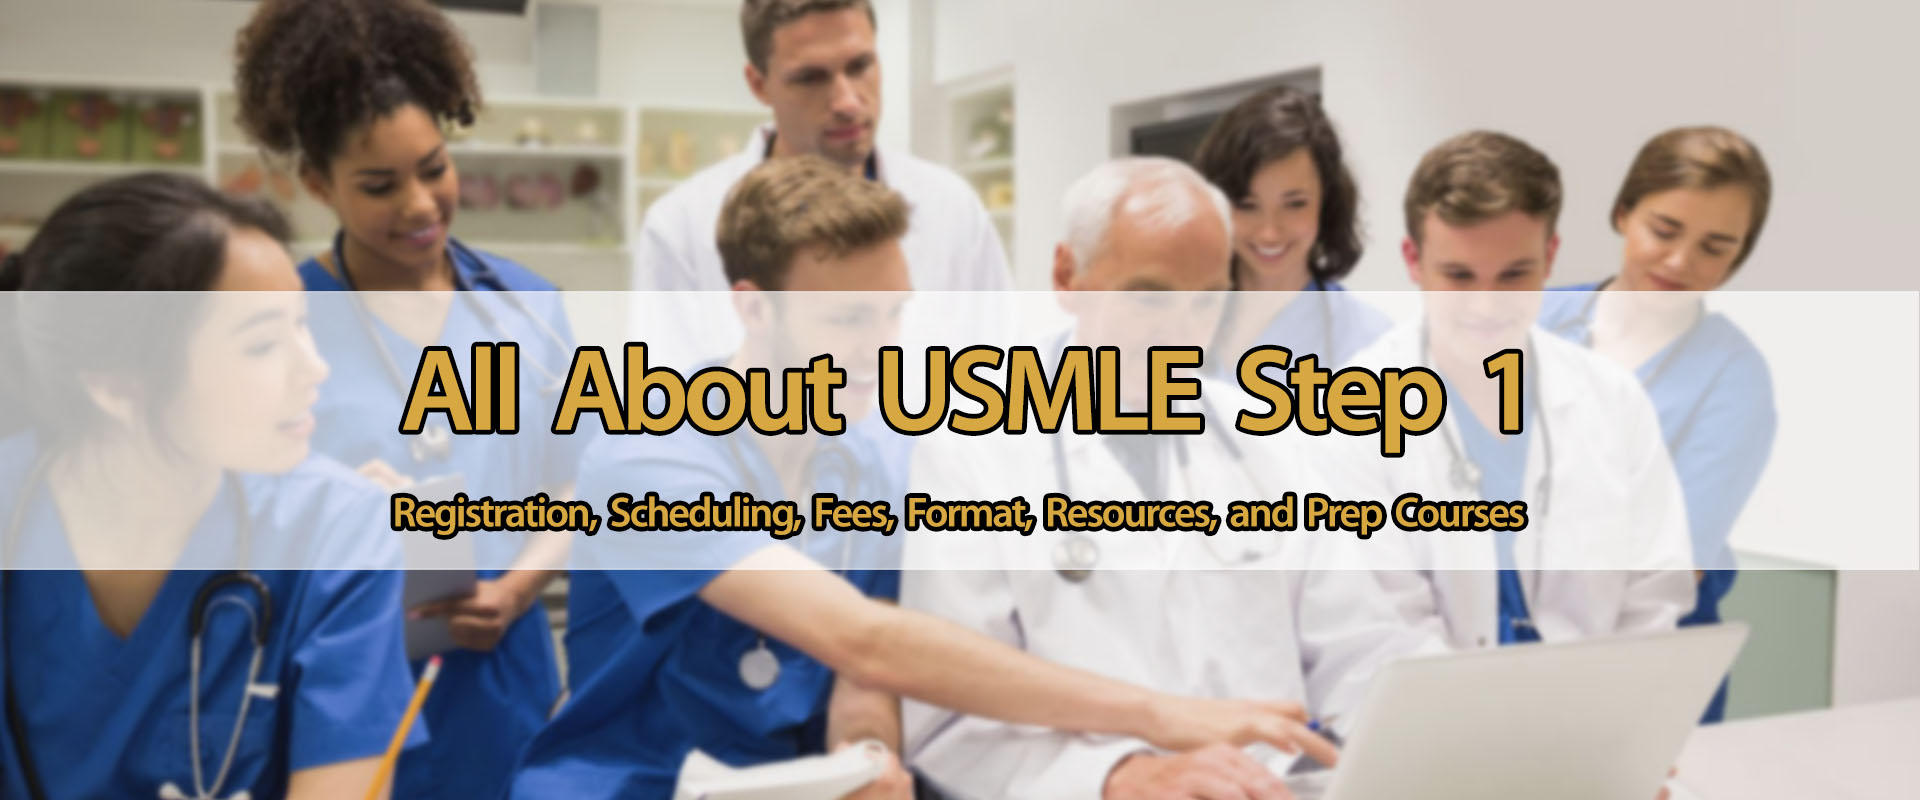 All About USMLE Step 1